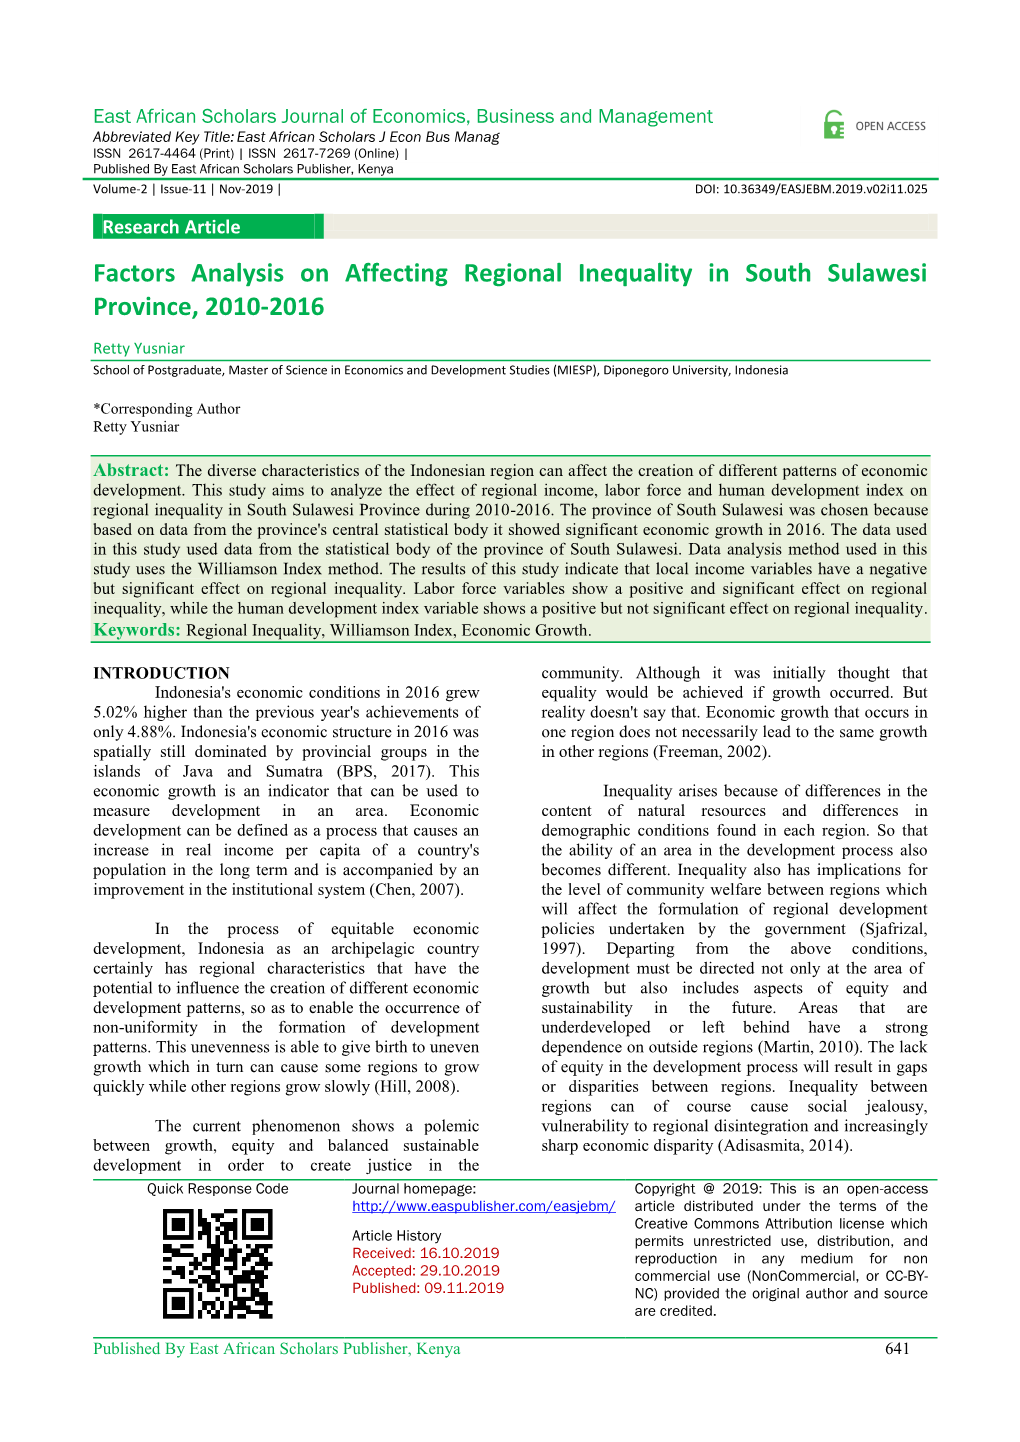 Factors Analysis on Affecting Regional Inequality in South Sulawesi Province, 2010-2016